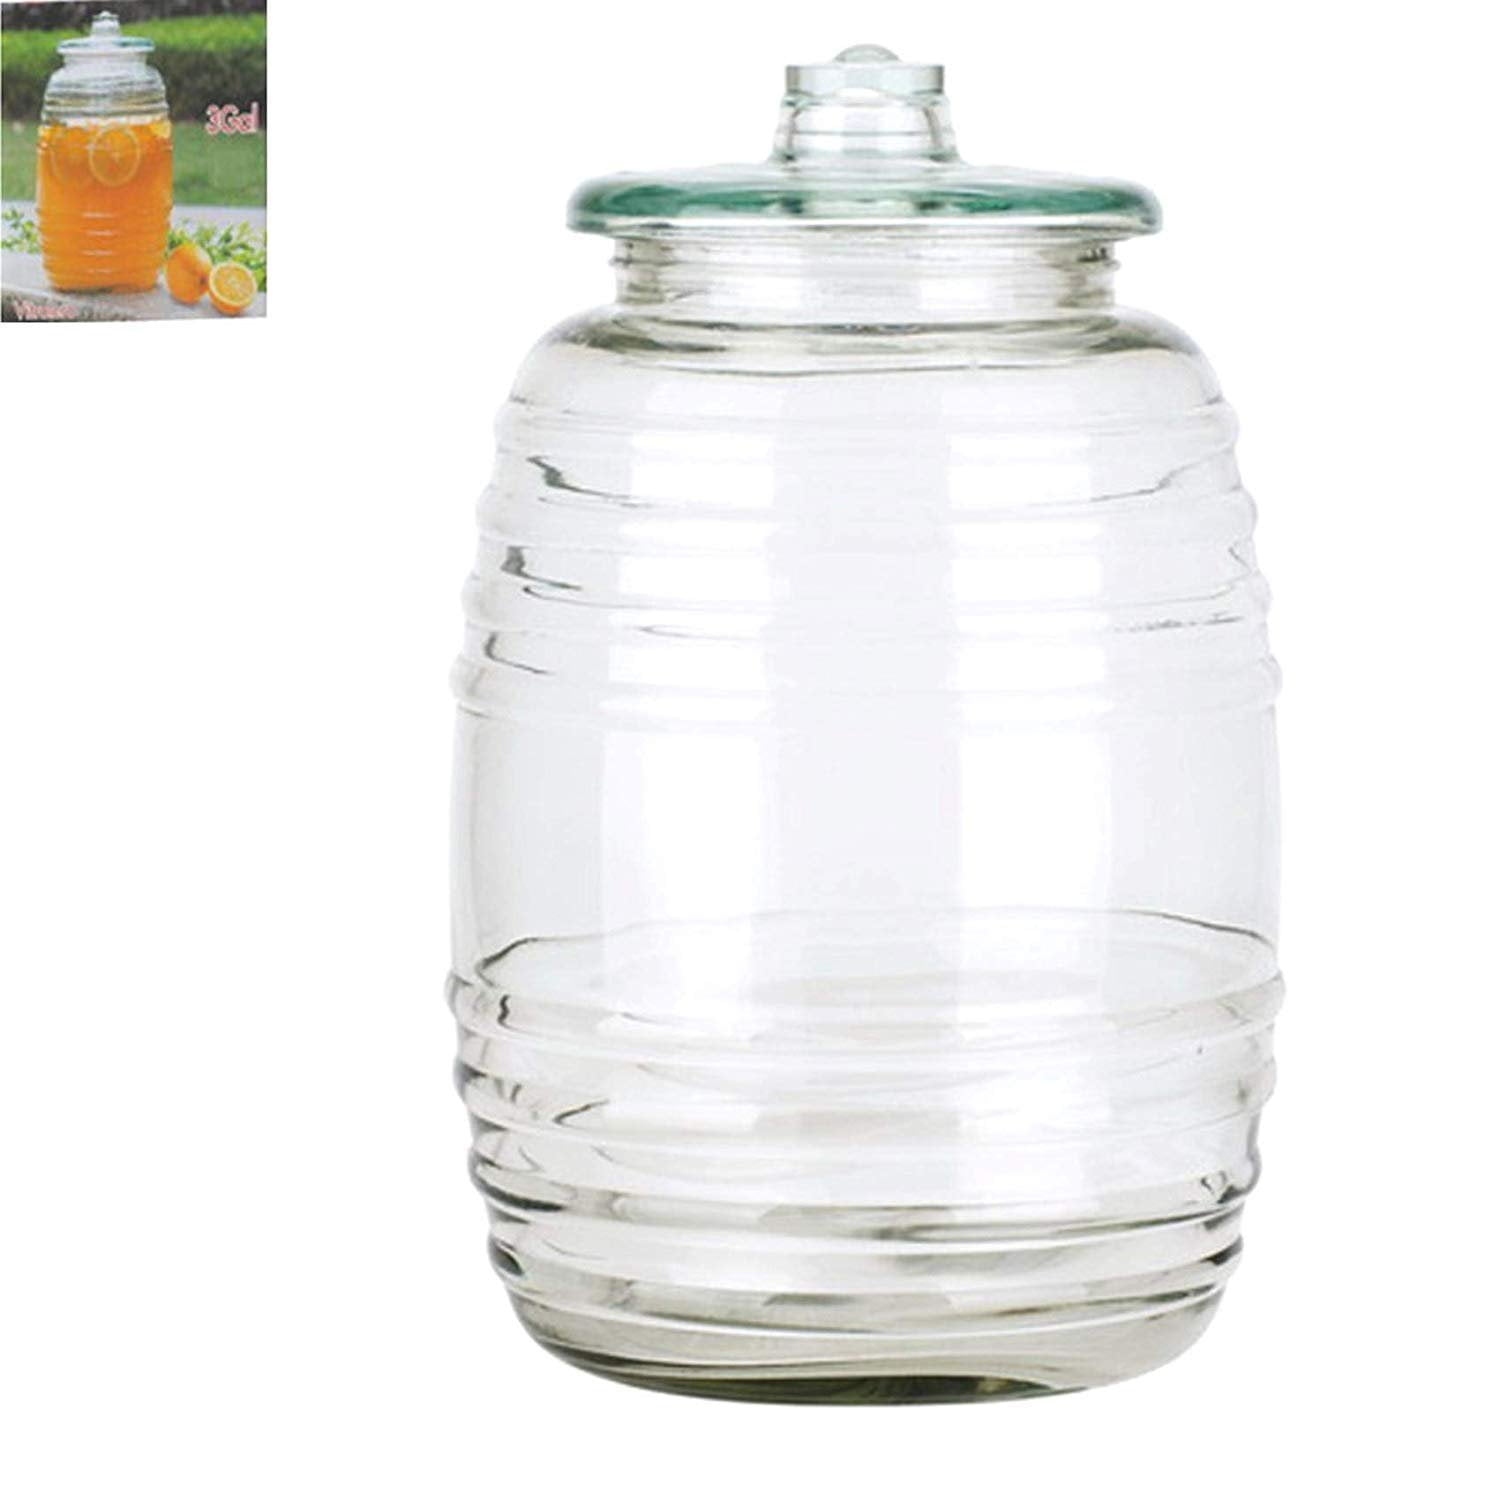 5 Gallon Glass Barrel Jar Vitrolero Aguas Frescas Water Juice Beverage  Container With Lid Fiesta Catering Party Wedding